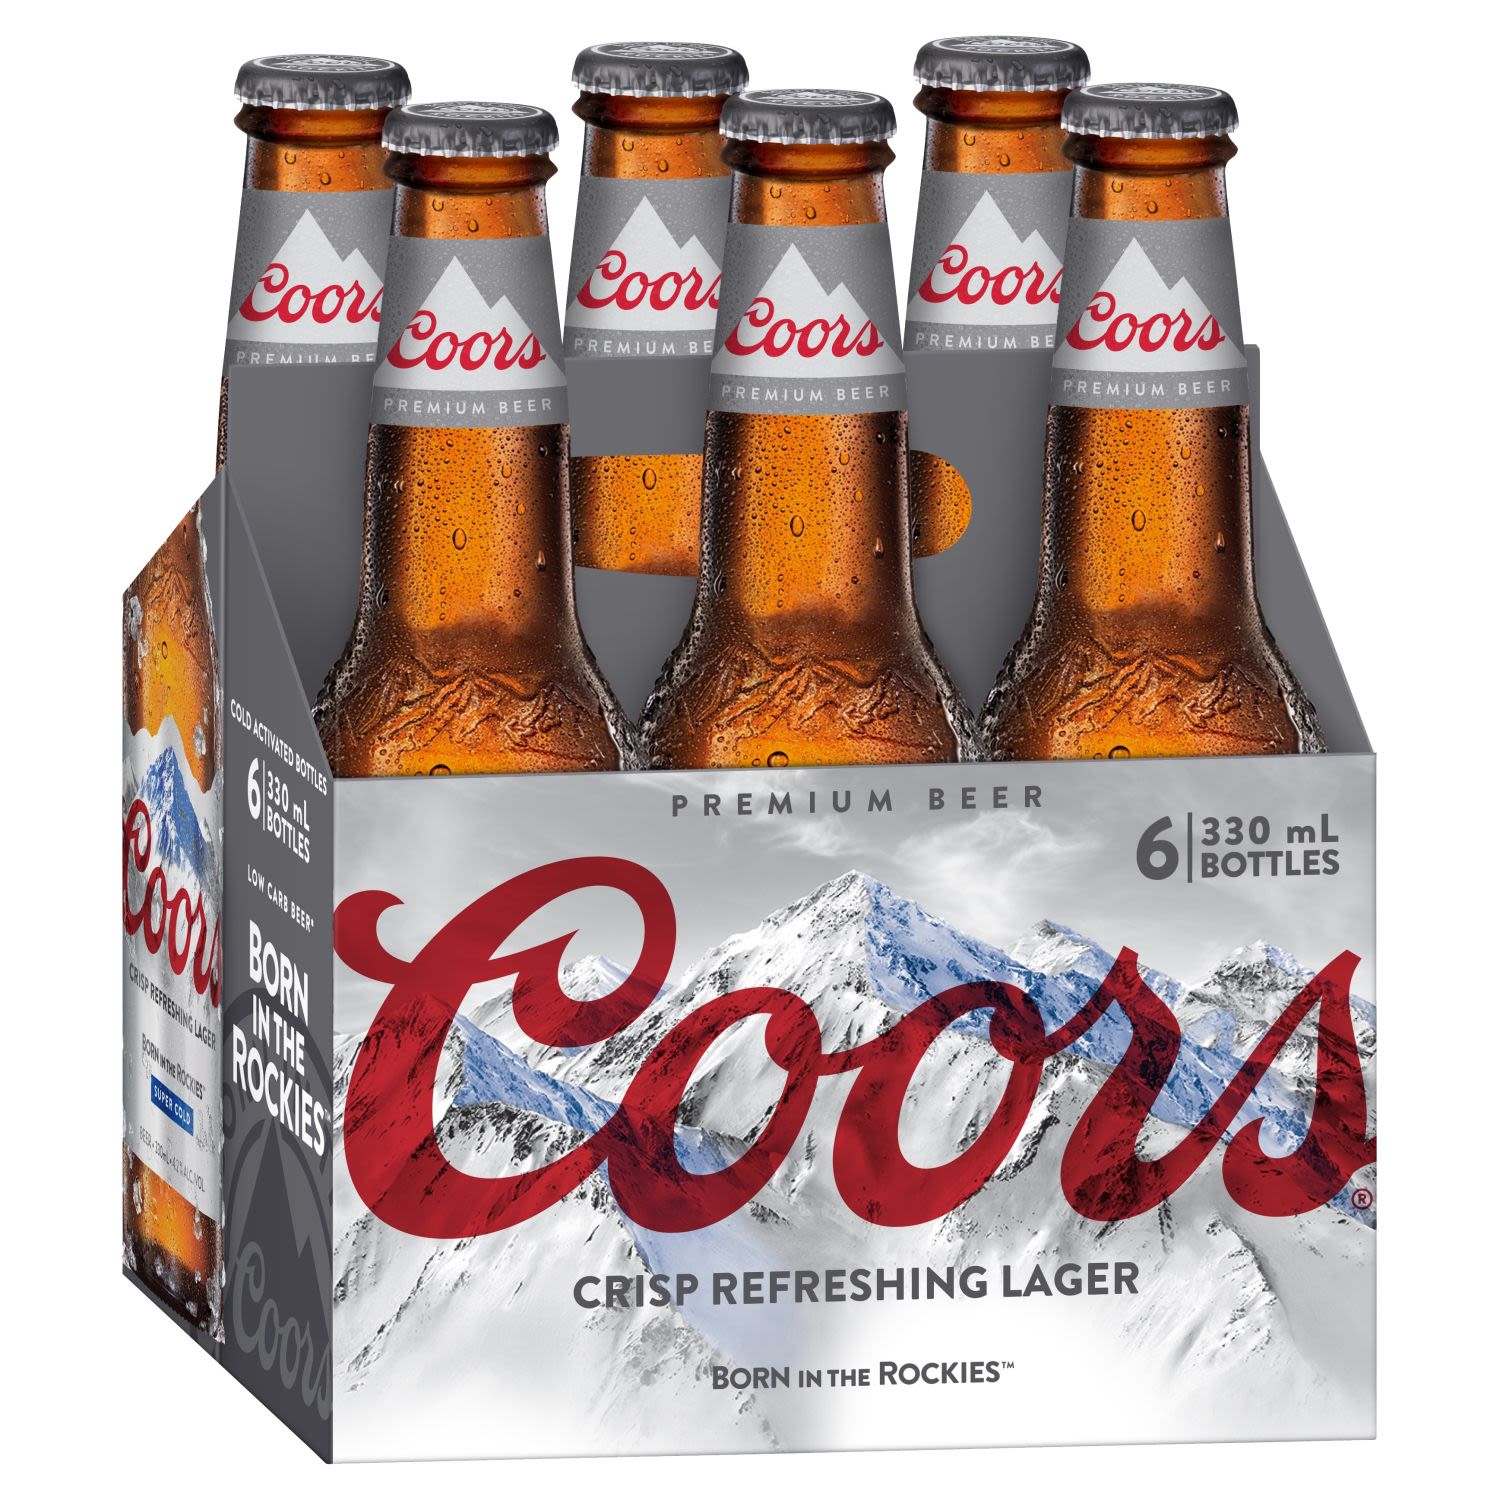 Coors was first developed in 1873 in the American Rocky Mountains. Coors is bottled at the peak of freshness, so that every Coors beer starts cold and refreshing, and ends the same smooth way.<br /> <br />Alcohol Volume: 4.20%<br /><br />Pack Format: 6 Pack<br /><br />Standard Drinks: 1.1</br /><br />Pack Type: Bottle<br /><br />Country of Origin: USA<br />